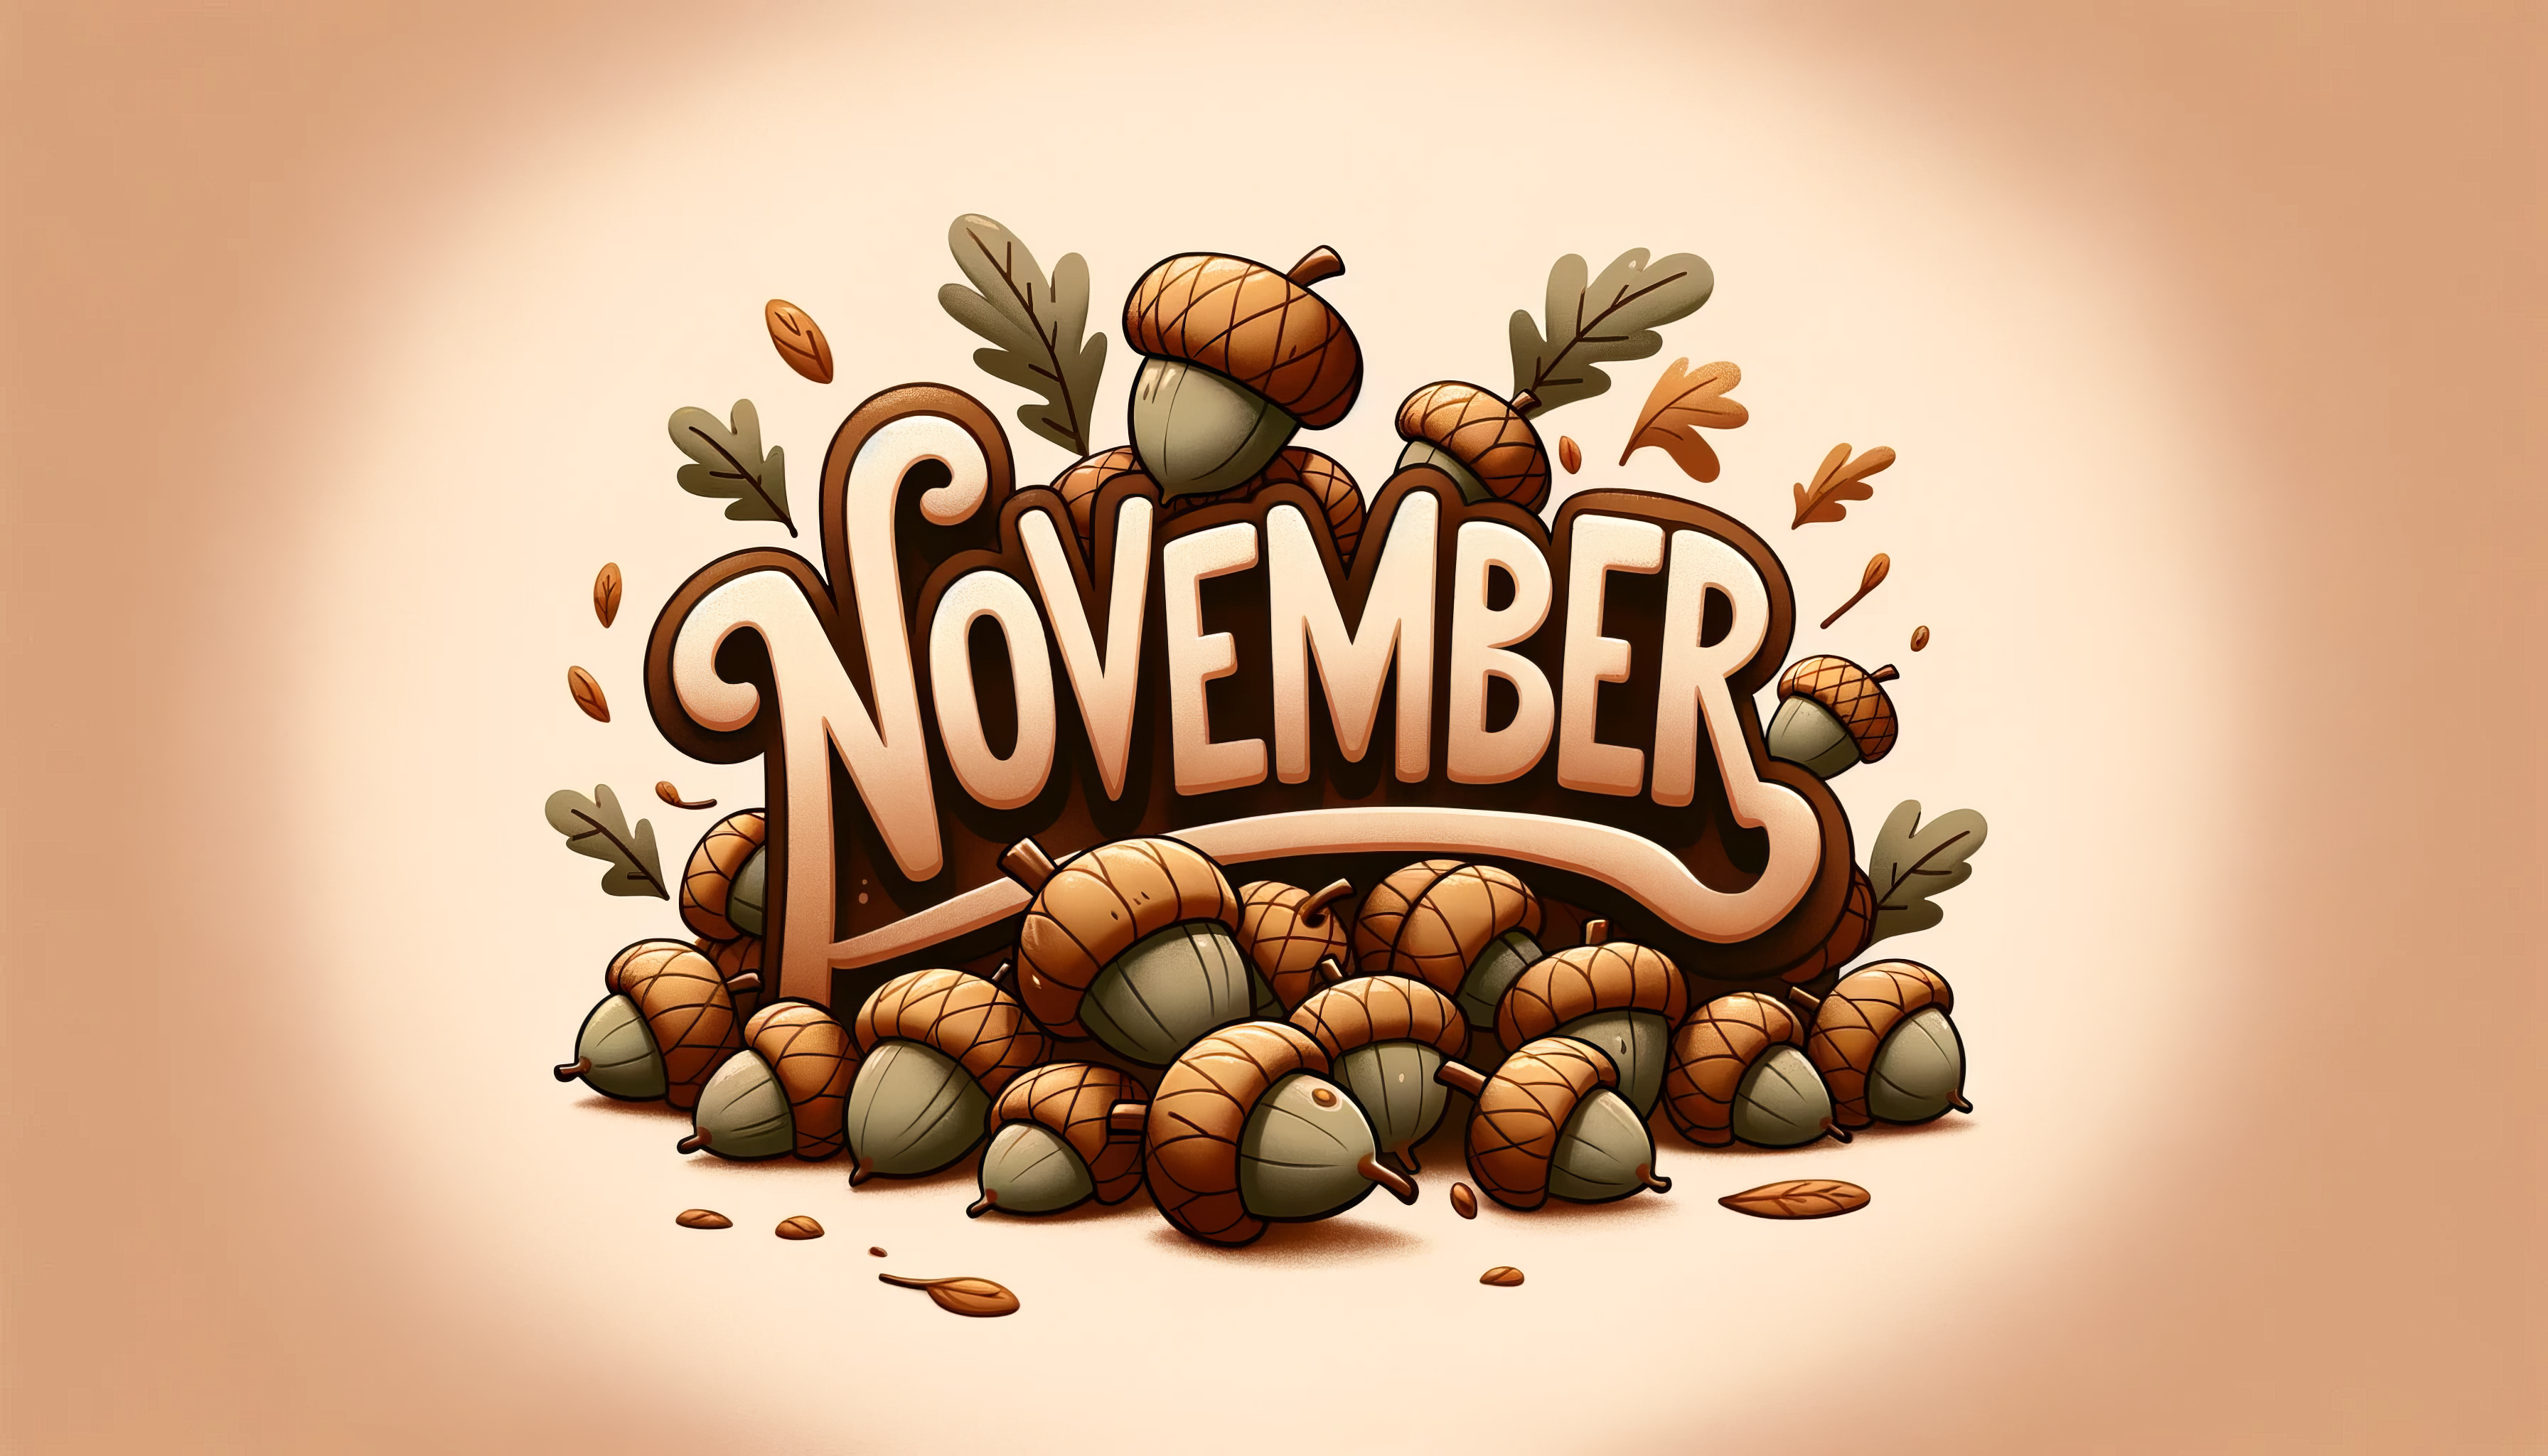 November-themed desktop wallpaper with stylized lettering surrounded by autumnal acorns and leaves on a warm, beige background.